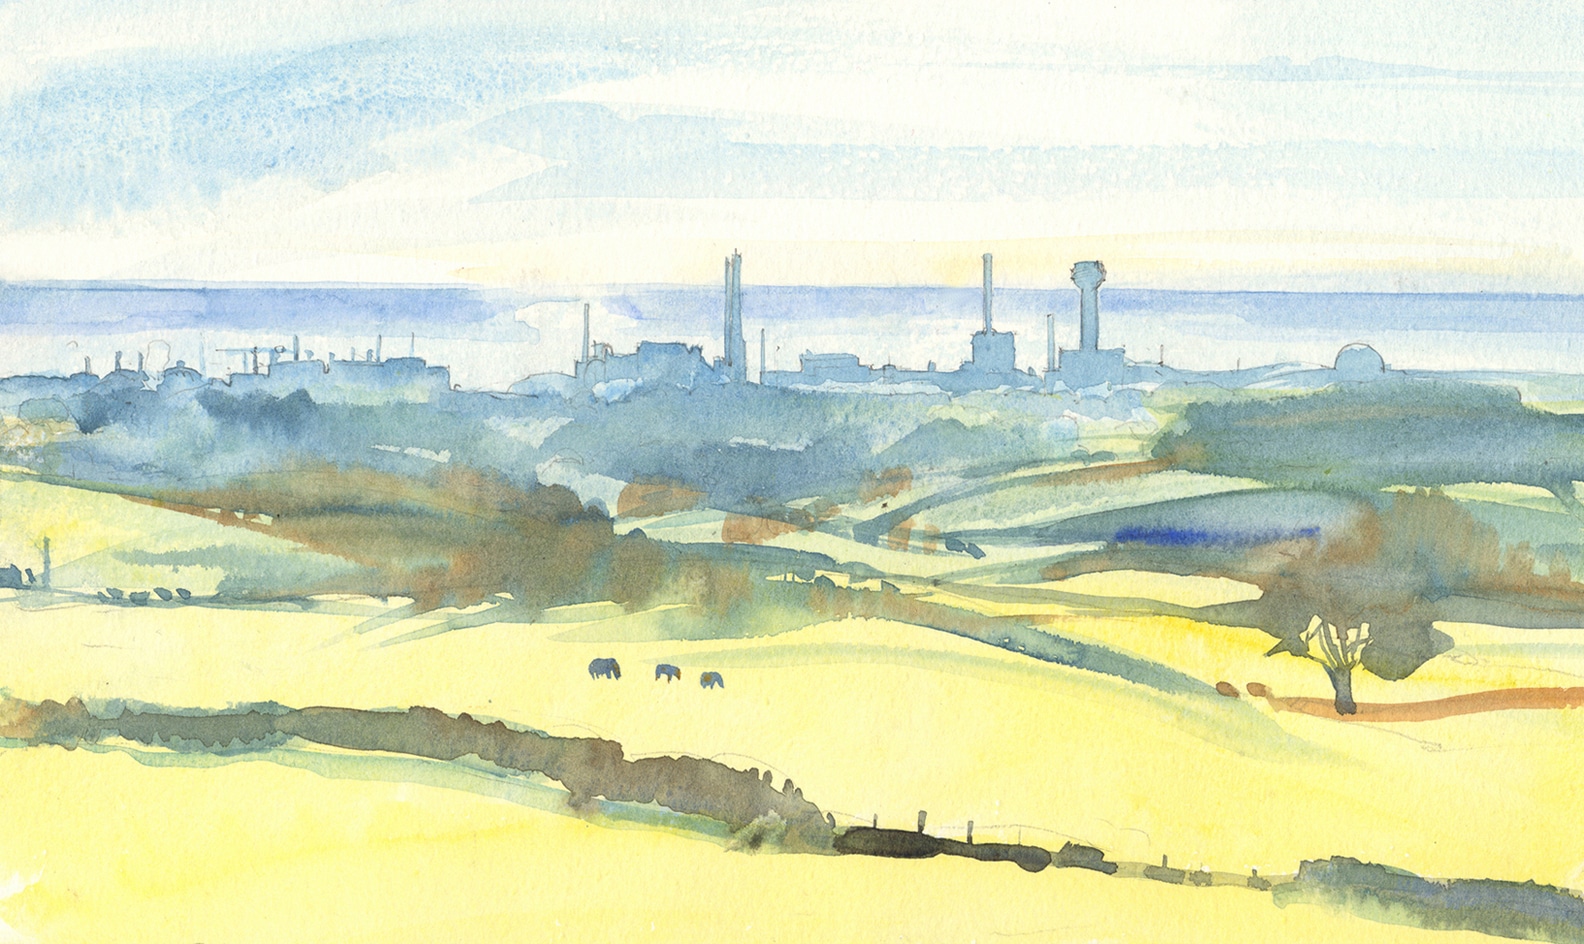 Dreaming spires - Arnold thou should'st be living at this hour (view of Sellafield Cumbria)